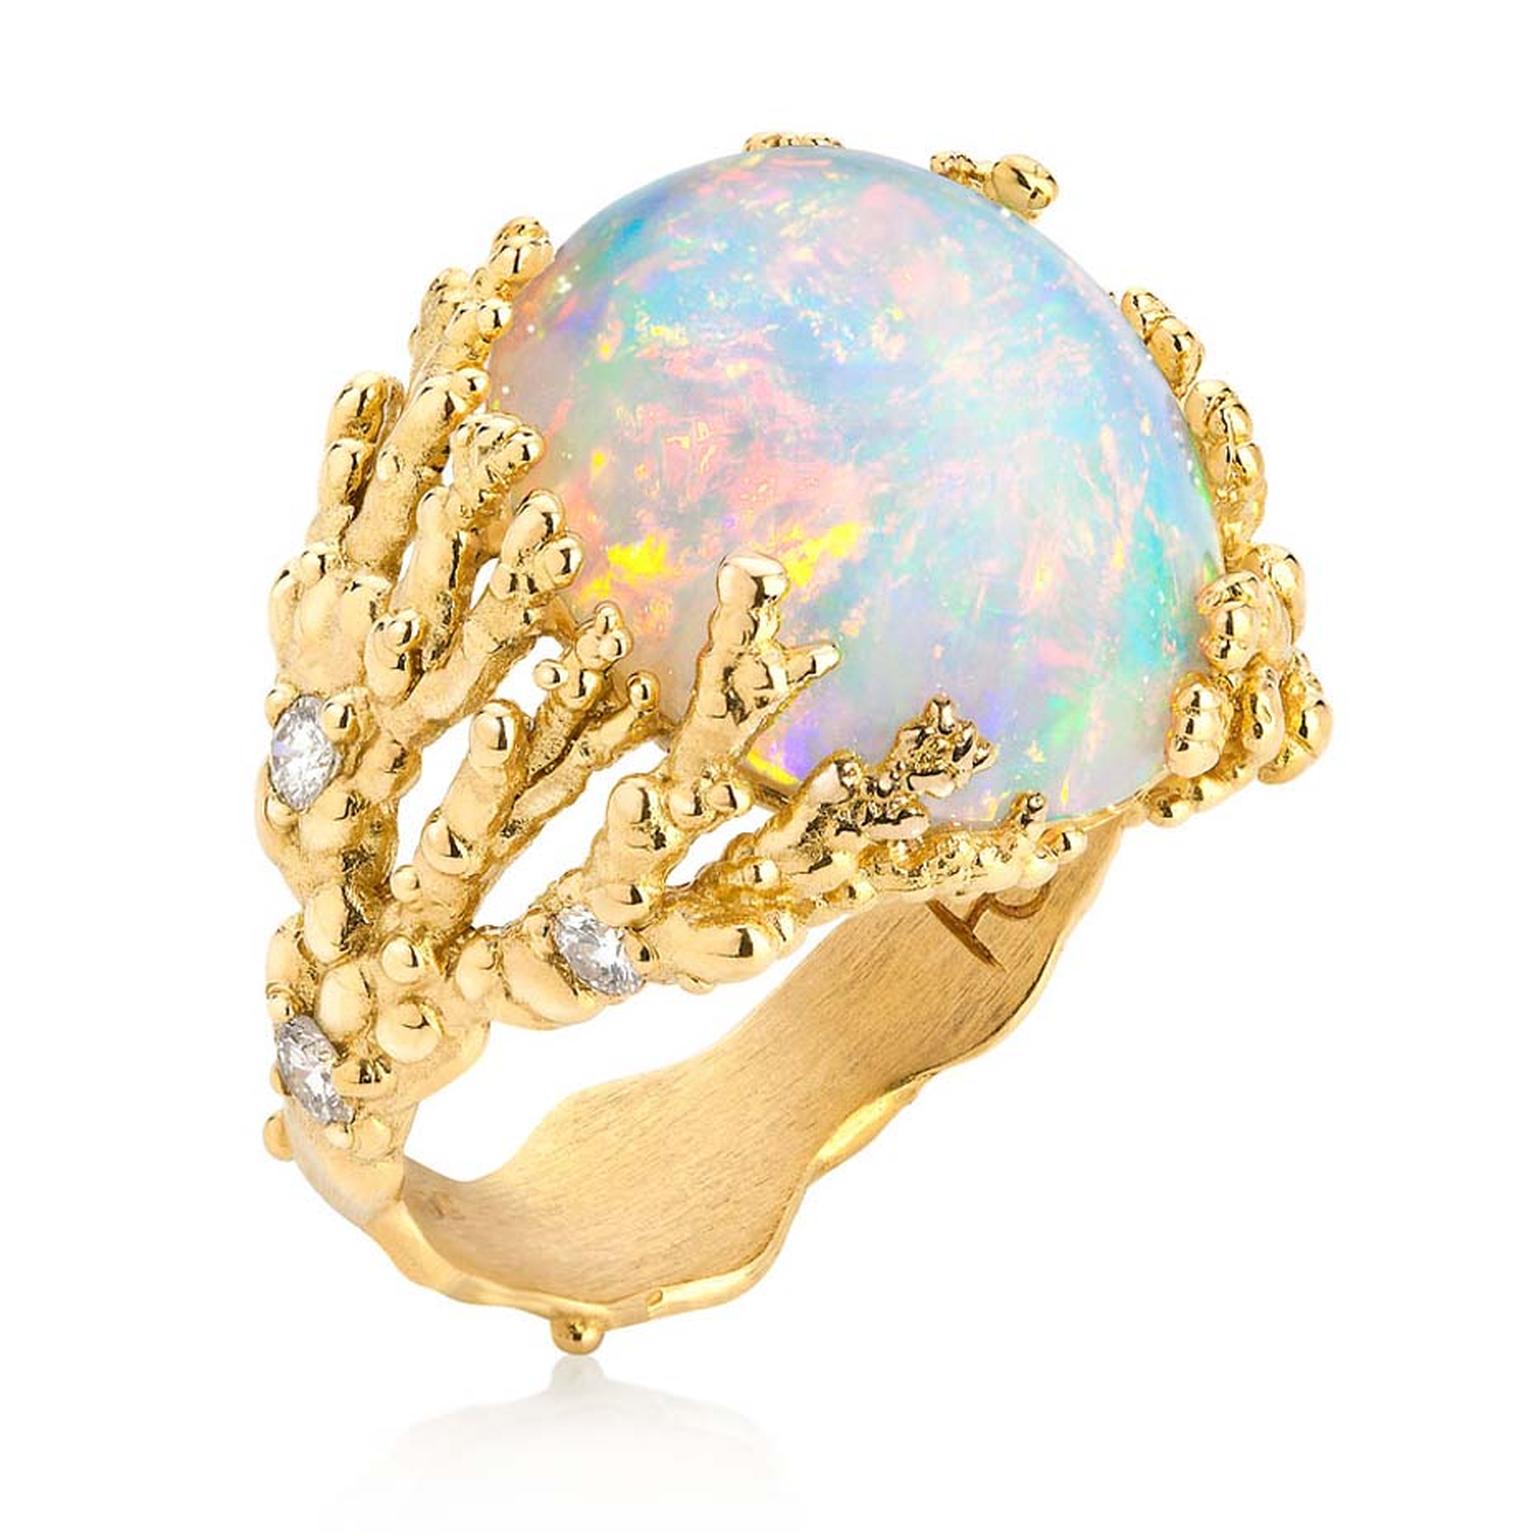 Ornella Iannuzzi "Coral Atoll" ring, featuring an Ethiopian Wello Opal set in gold.